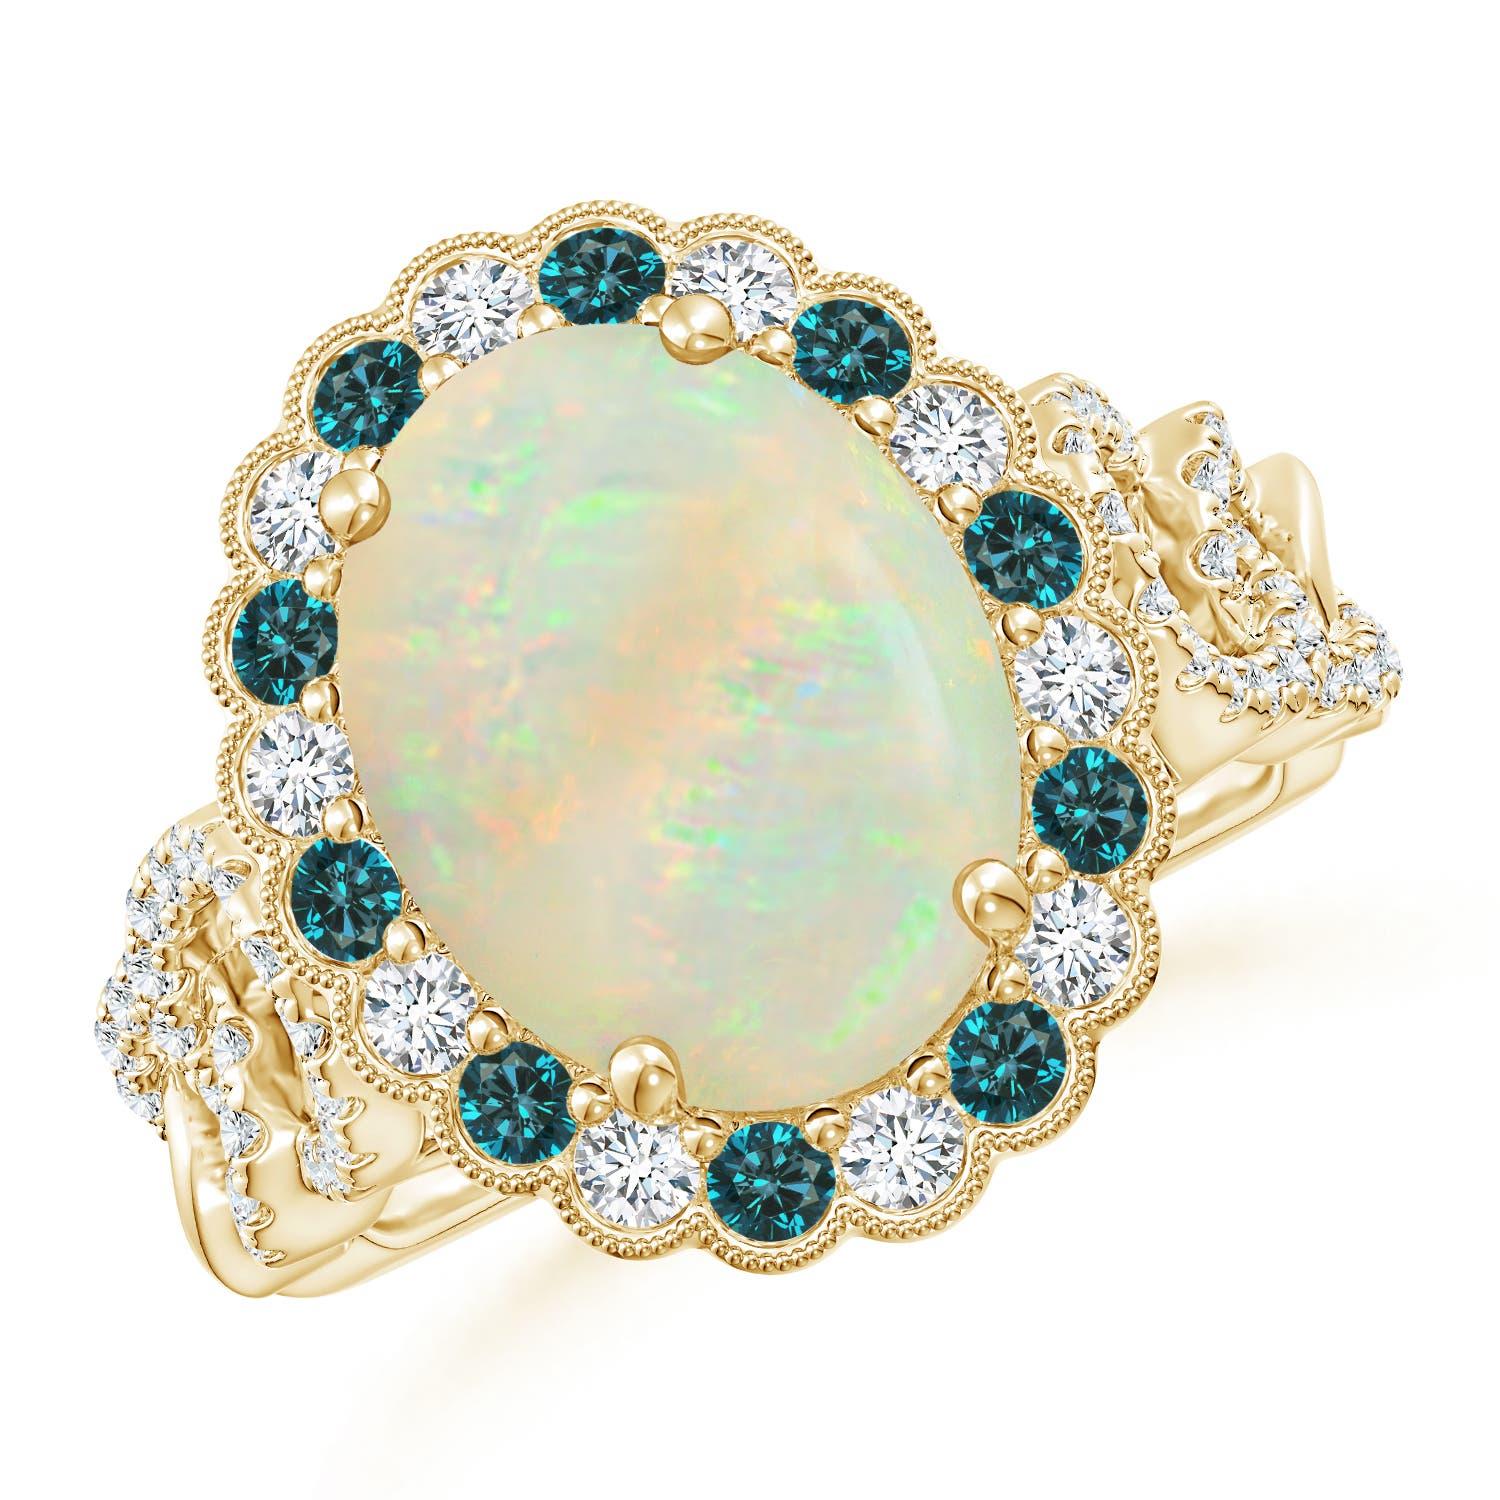 For Sale:  Angara Gia Certified Natural Opal Ring in Yellow Gold with Blue & White Diamonds